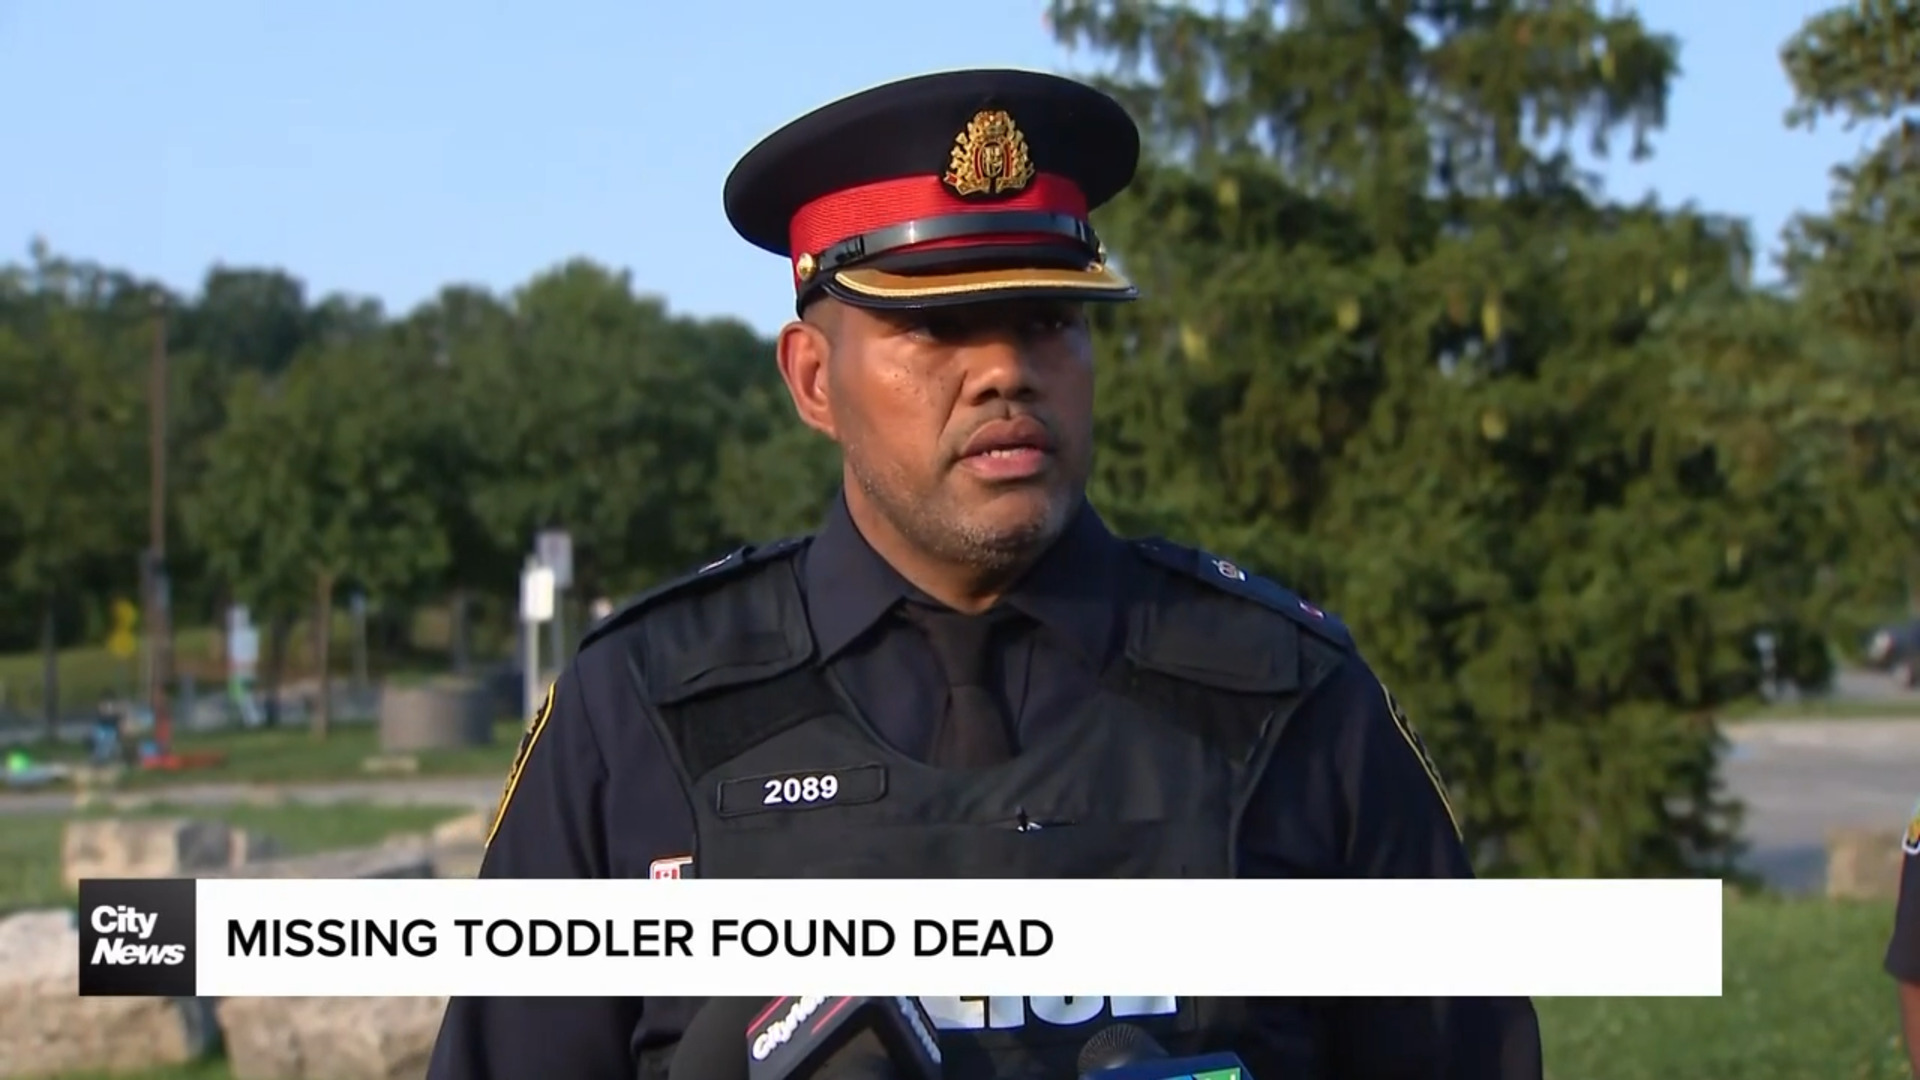 Peel Regional Police provide update on search for missing 3-year-old in Mississauga